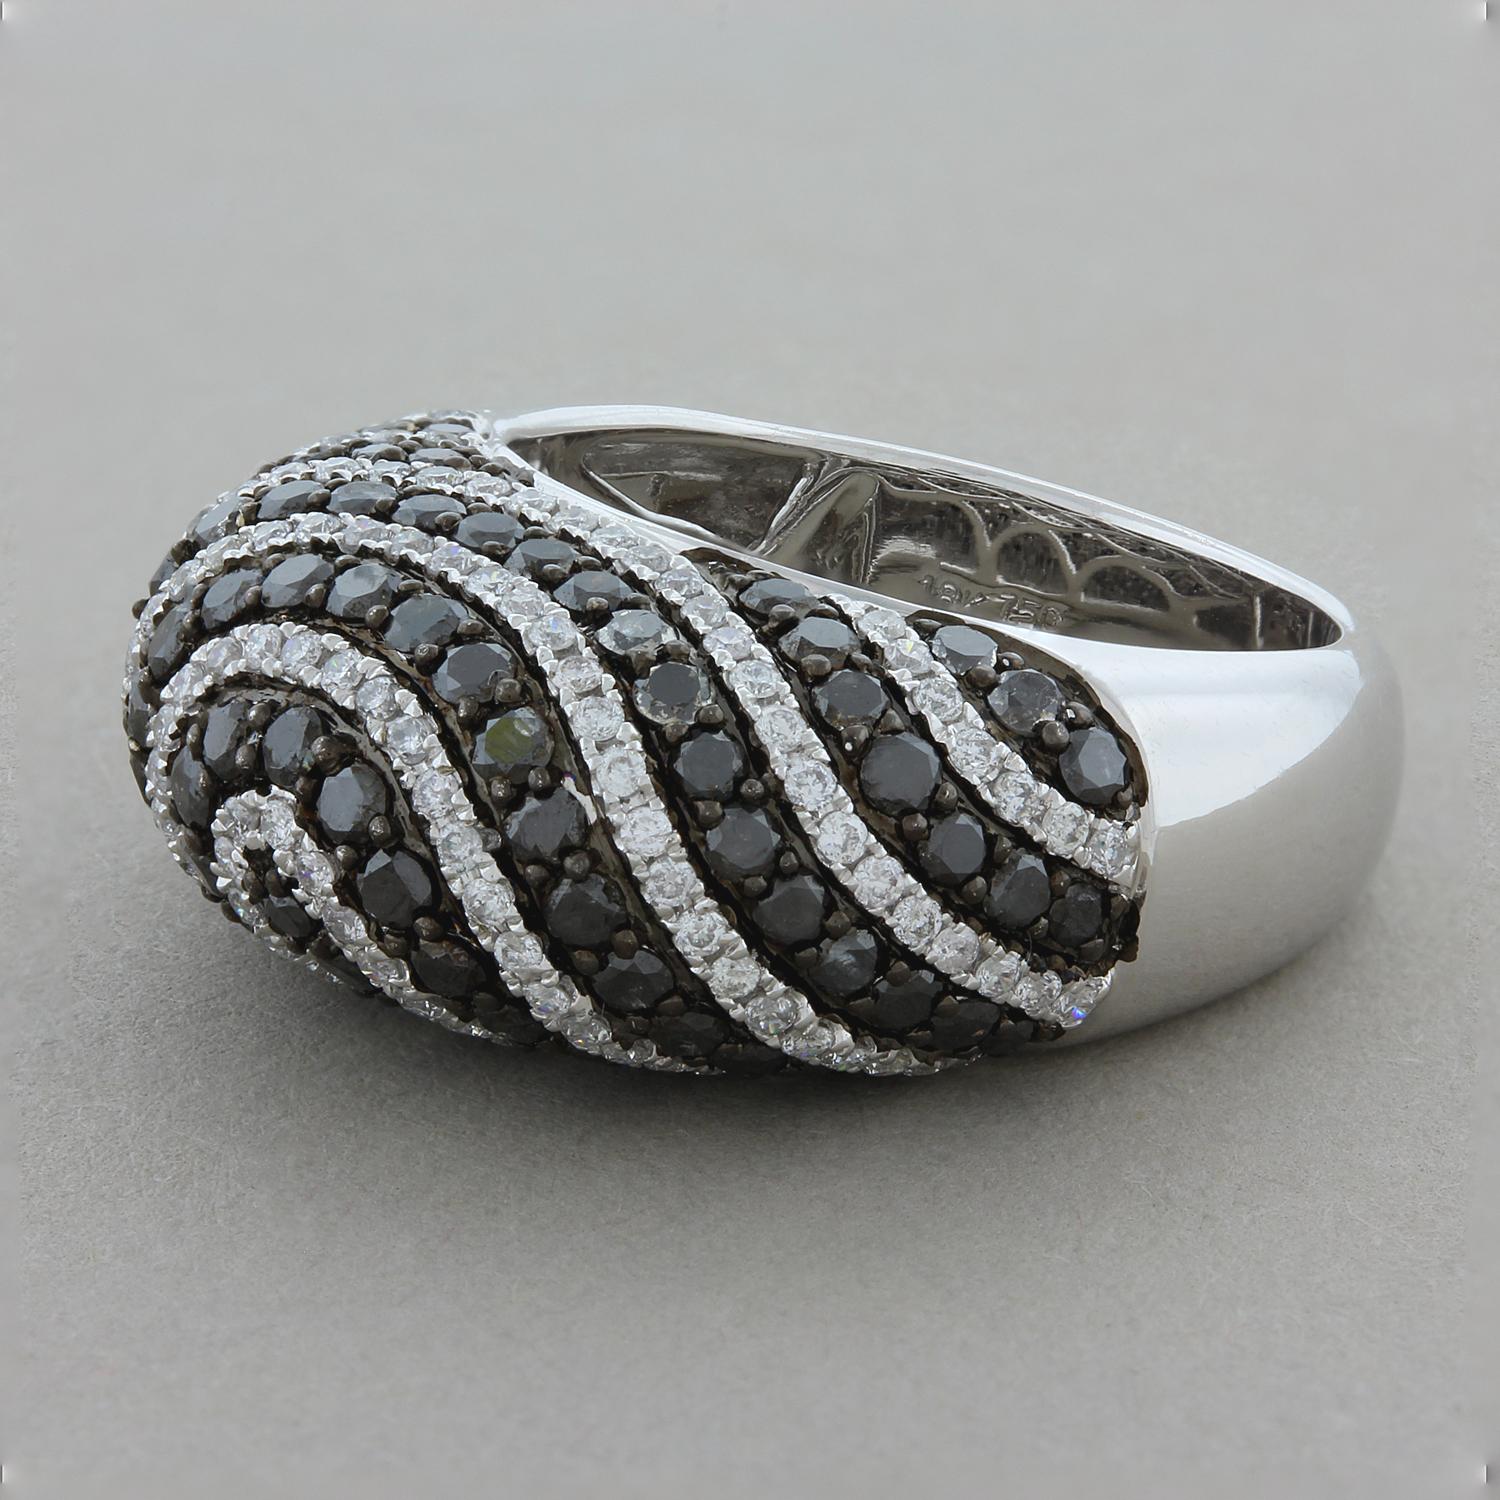 This domed cocktail ring features 2.11 carats of black diamonds alternating with swirls of 1.06 carats of white diamonds. The round cut diamonds are set in 18K white gold with a black rhodium finish to accentuate the black diamonds.

Ring Size 7.25